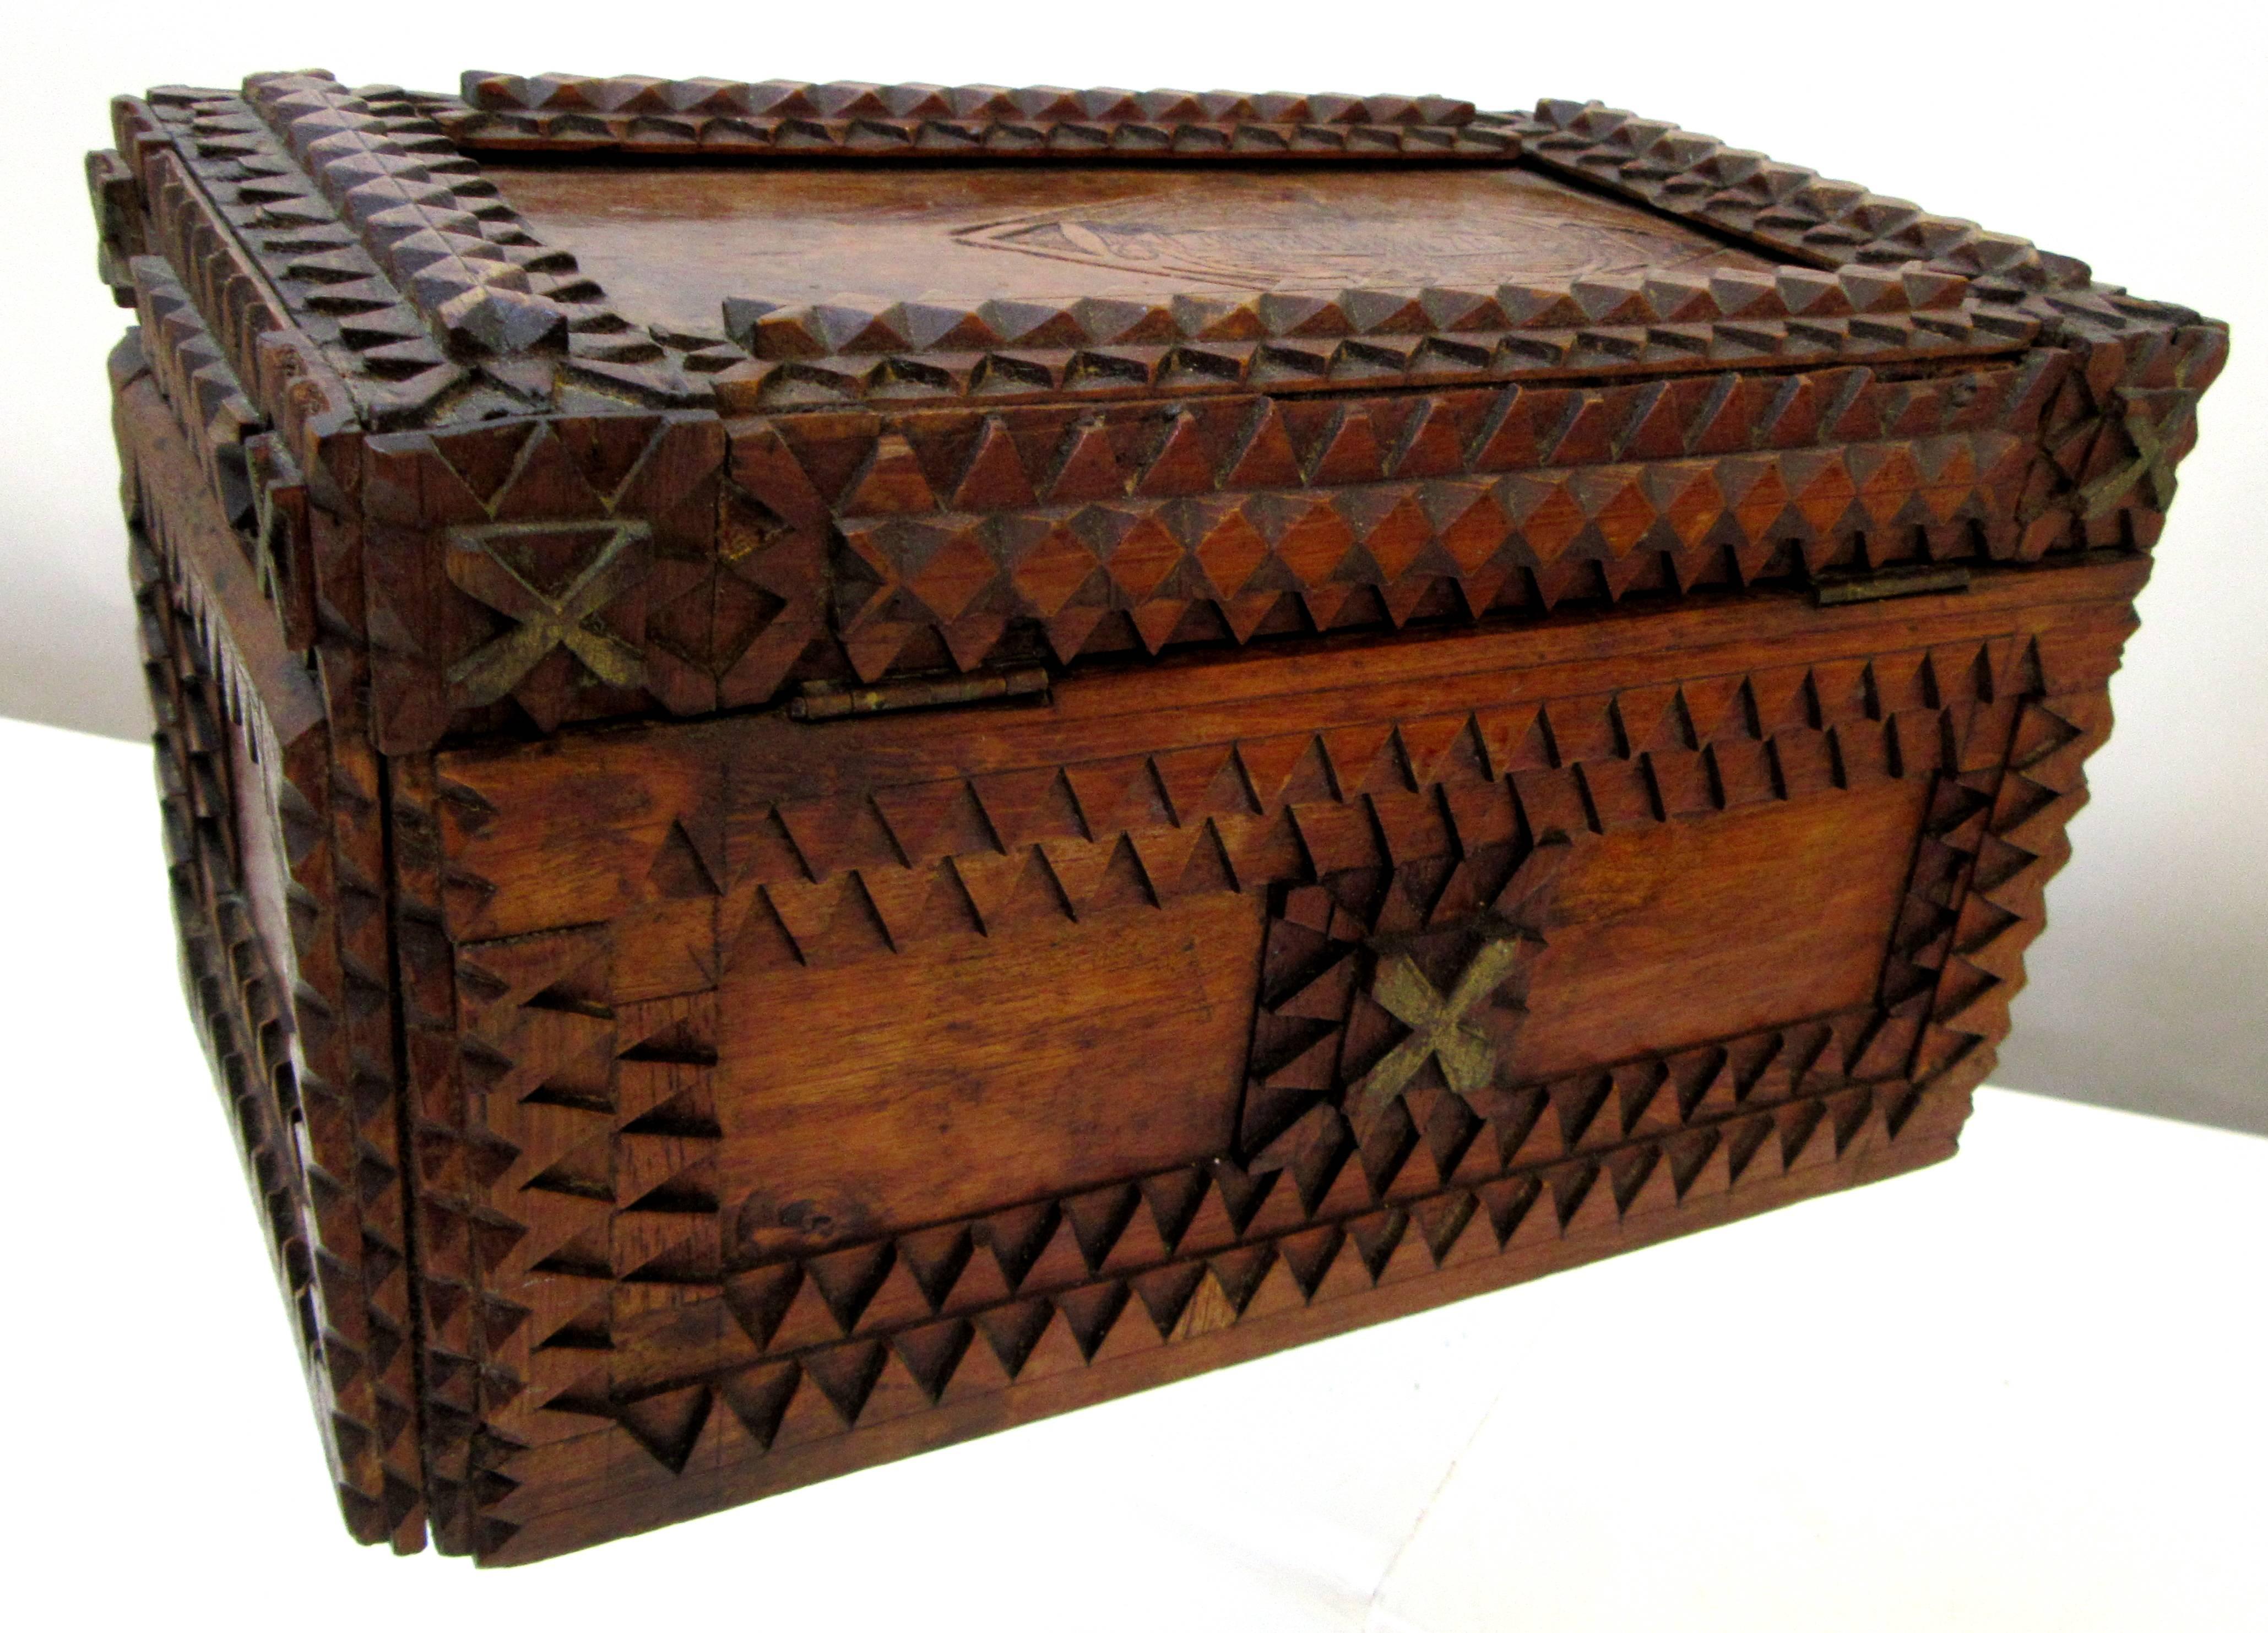 Carved Tramp Art Box with Historical Advertising Art